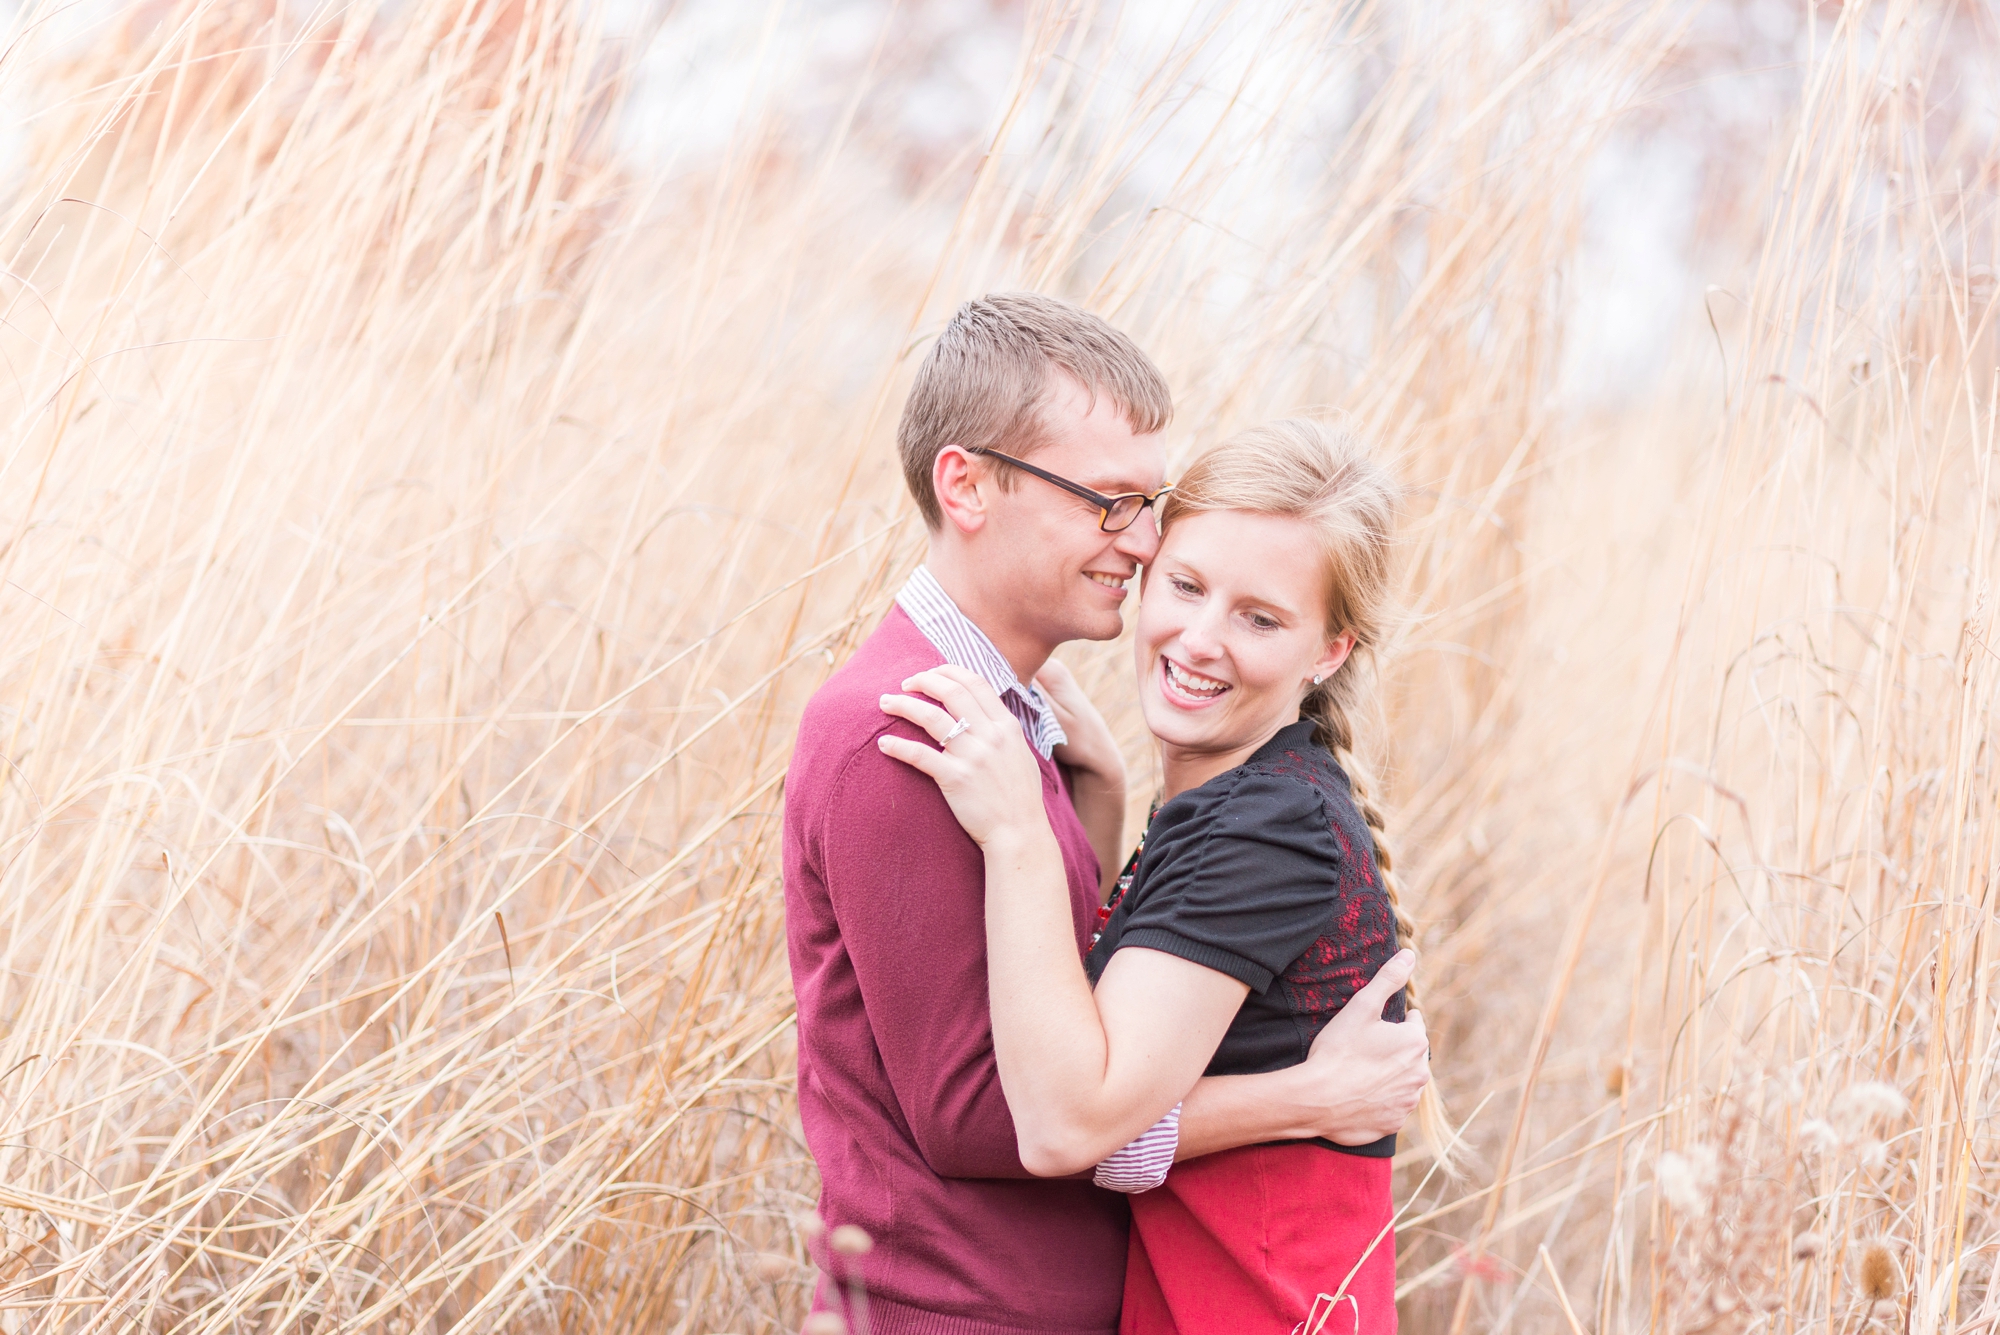 engagement-photography-at-sharon-woods-park-in-westerville-ohio_0002